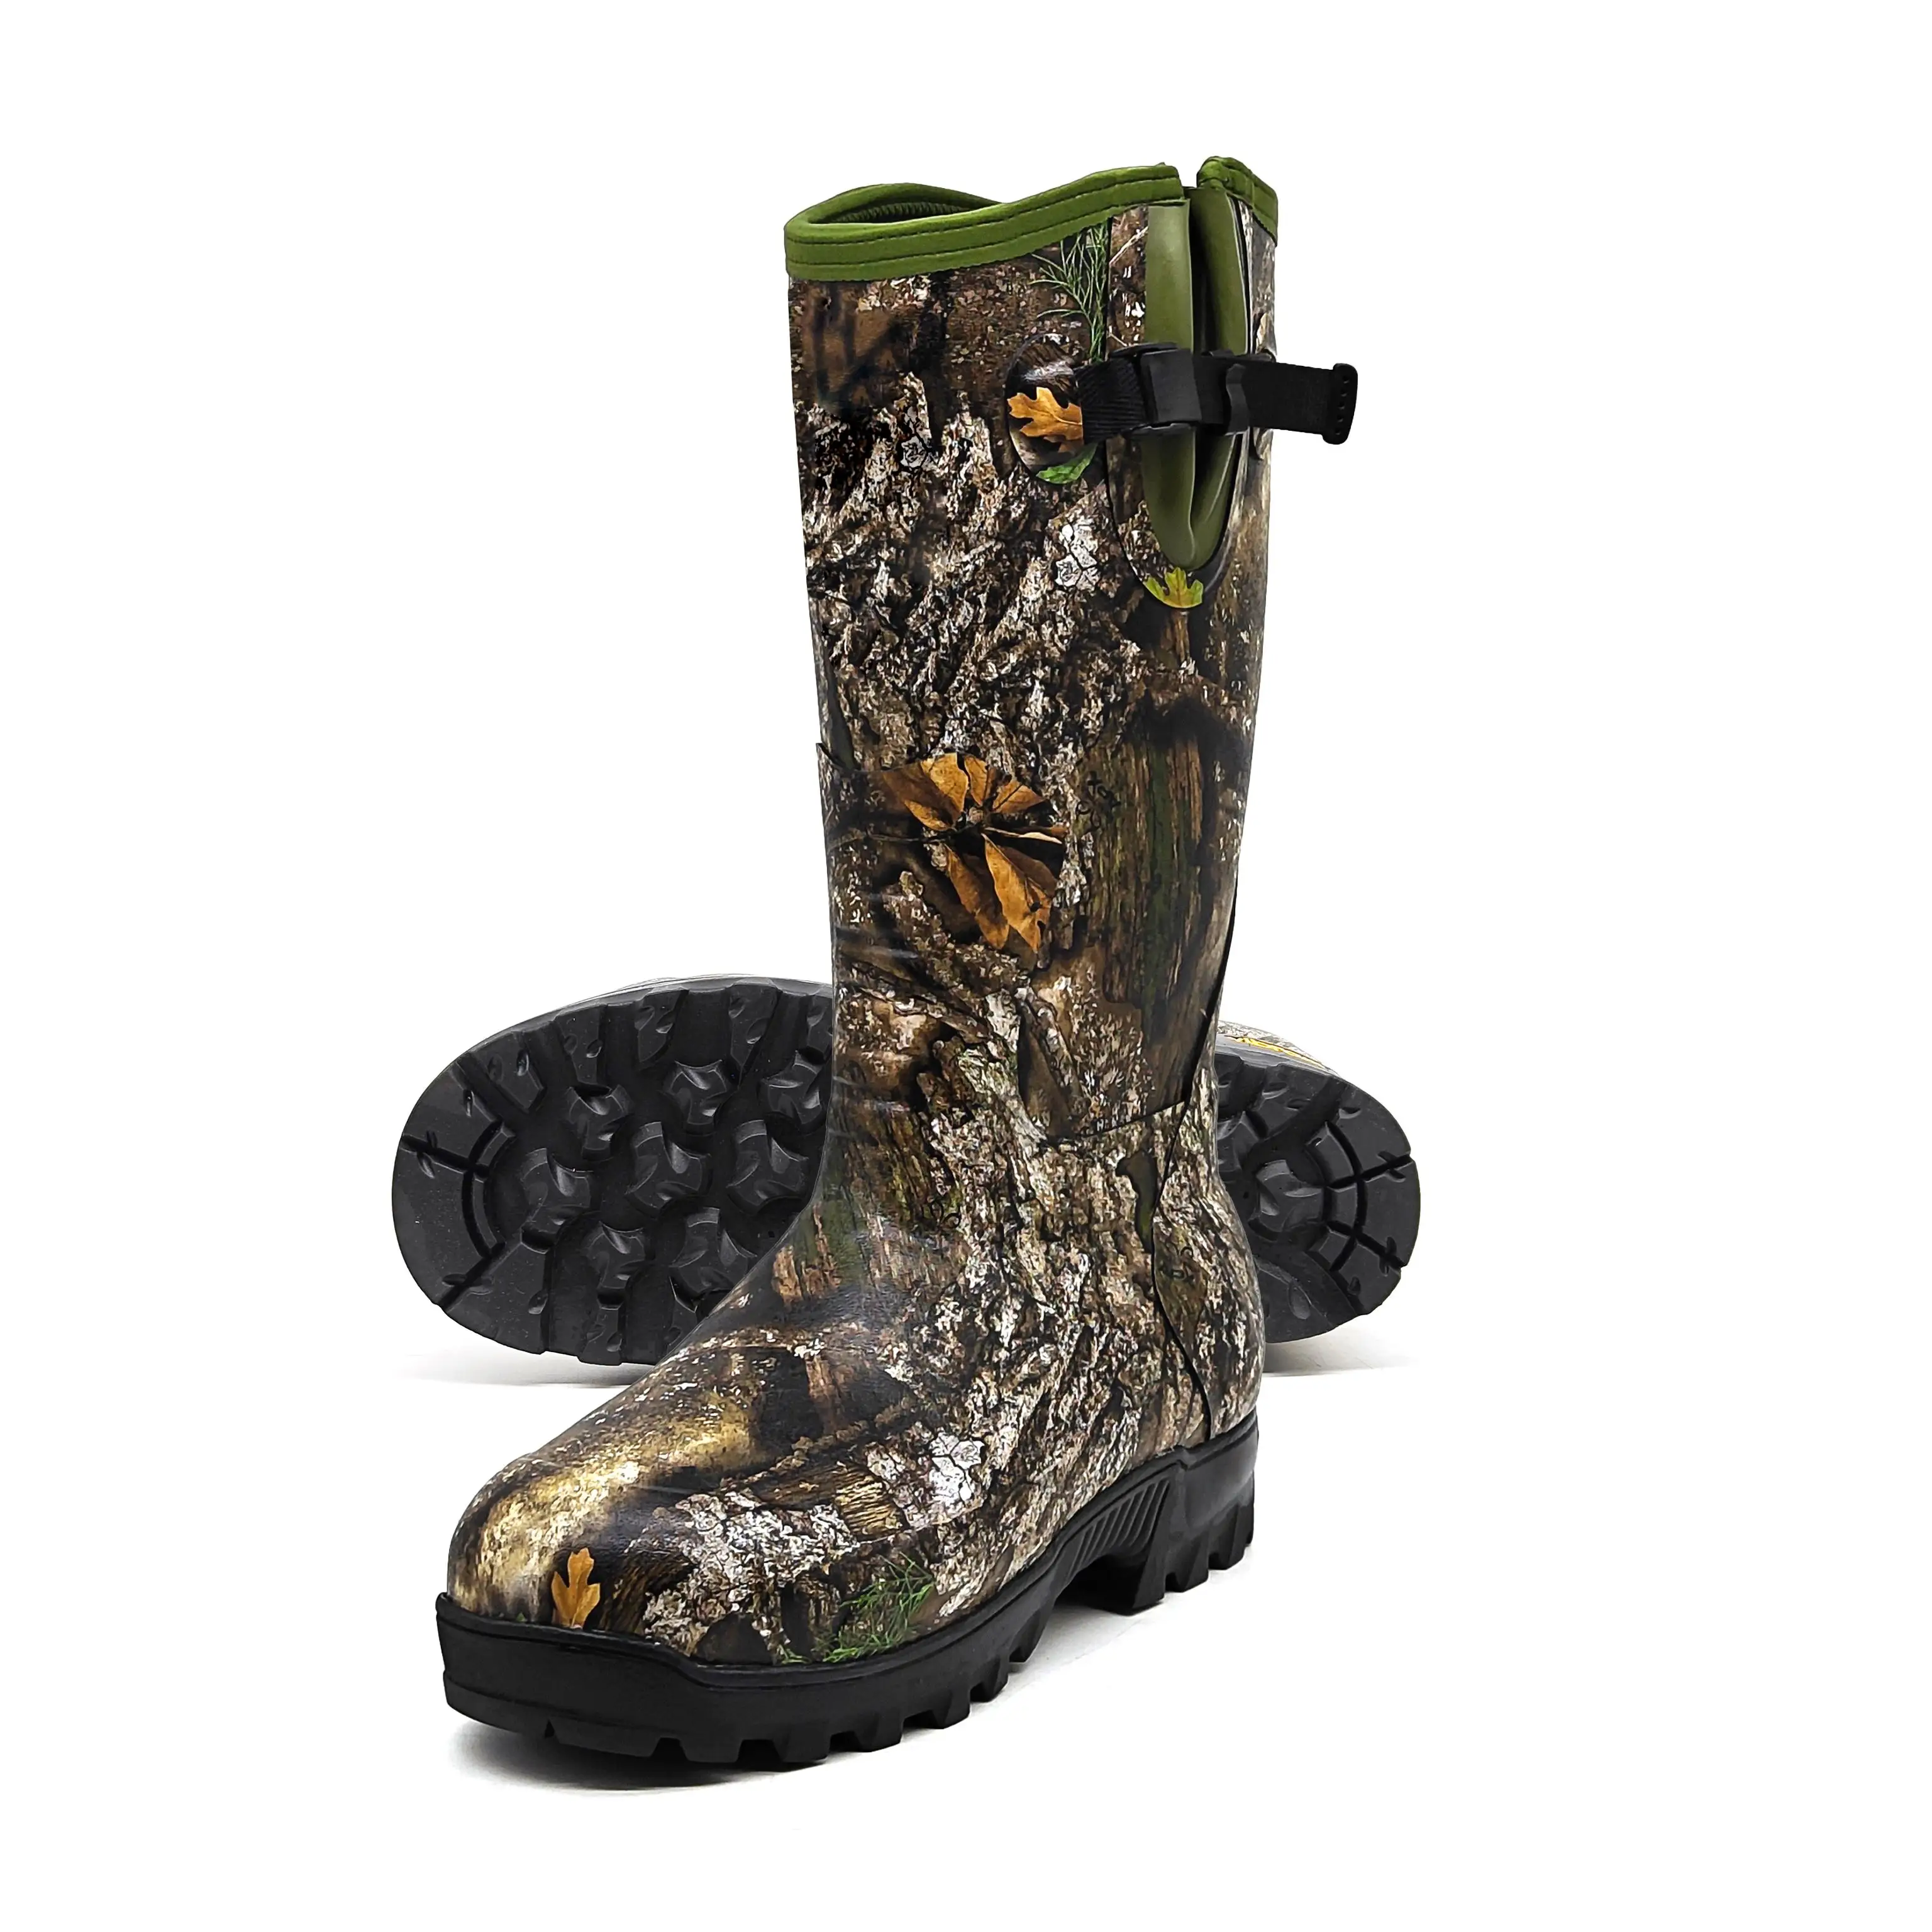 China manufacturer real tree camouflage waterproof rubber insulated neoprene boots winter boots men's knee high hunting boots